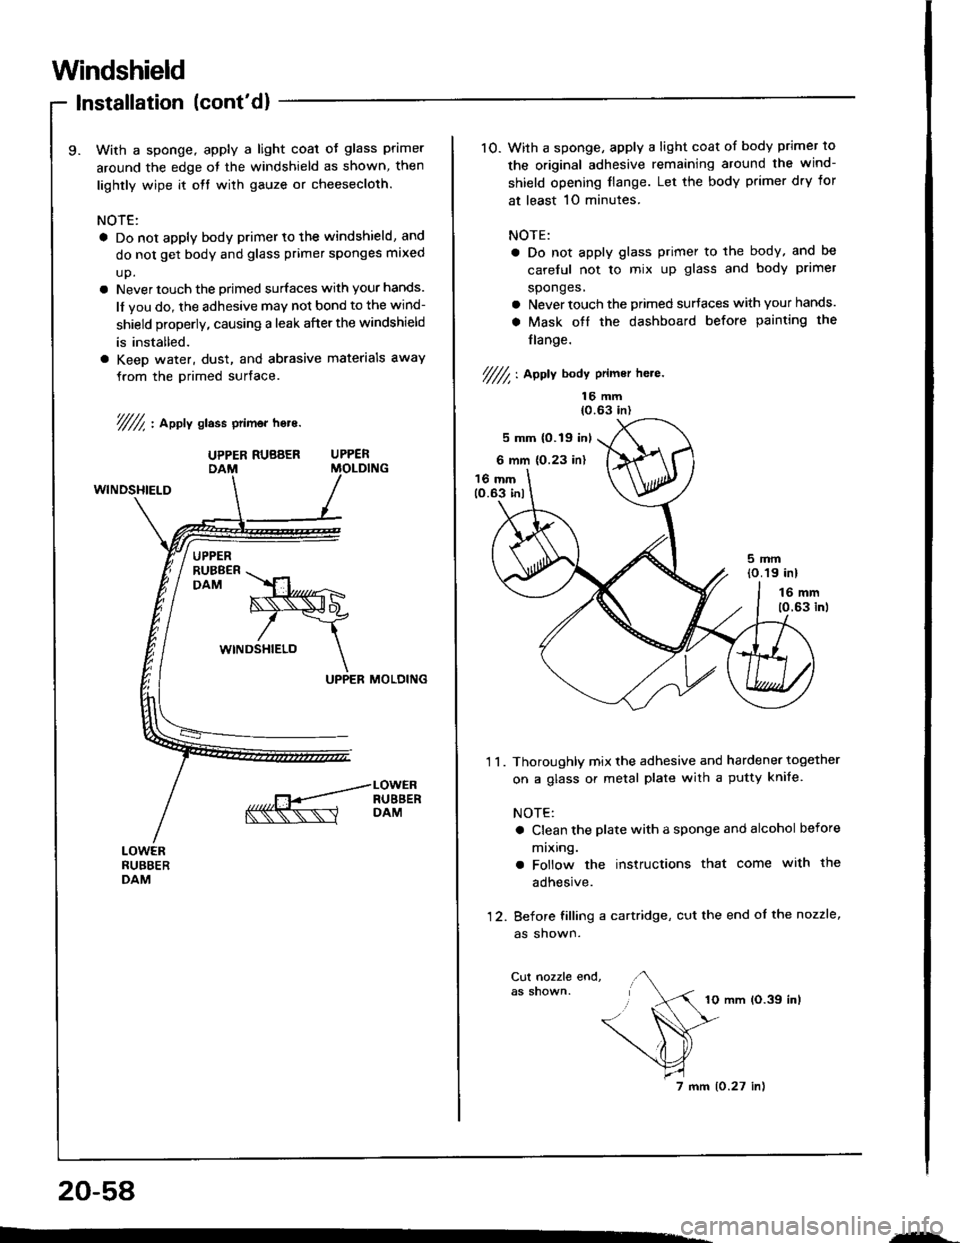 ACURA INTEGRA 1994  Service Repair Manual Windshield
Installation (contd)
With a sponge. apply a light coal oJ glass primer
around the edge ot the windshield as shown, then
lightly wipe it olt with gauze or cheesecloth.
NOTE:
a Do not apply 